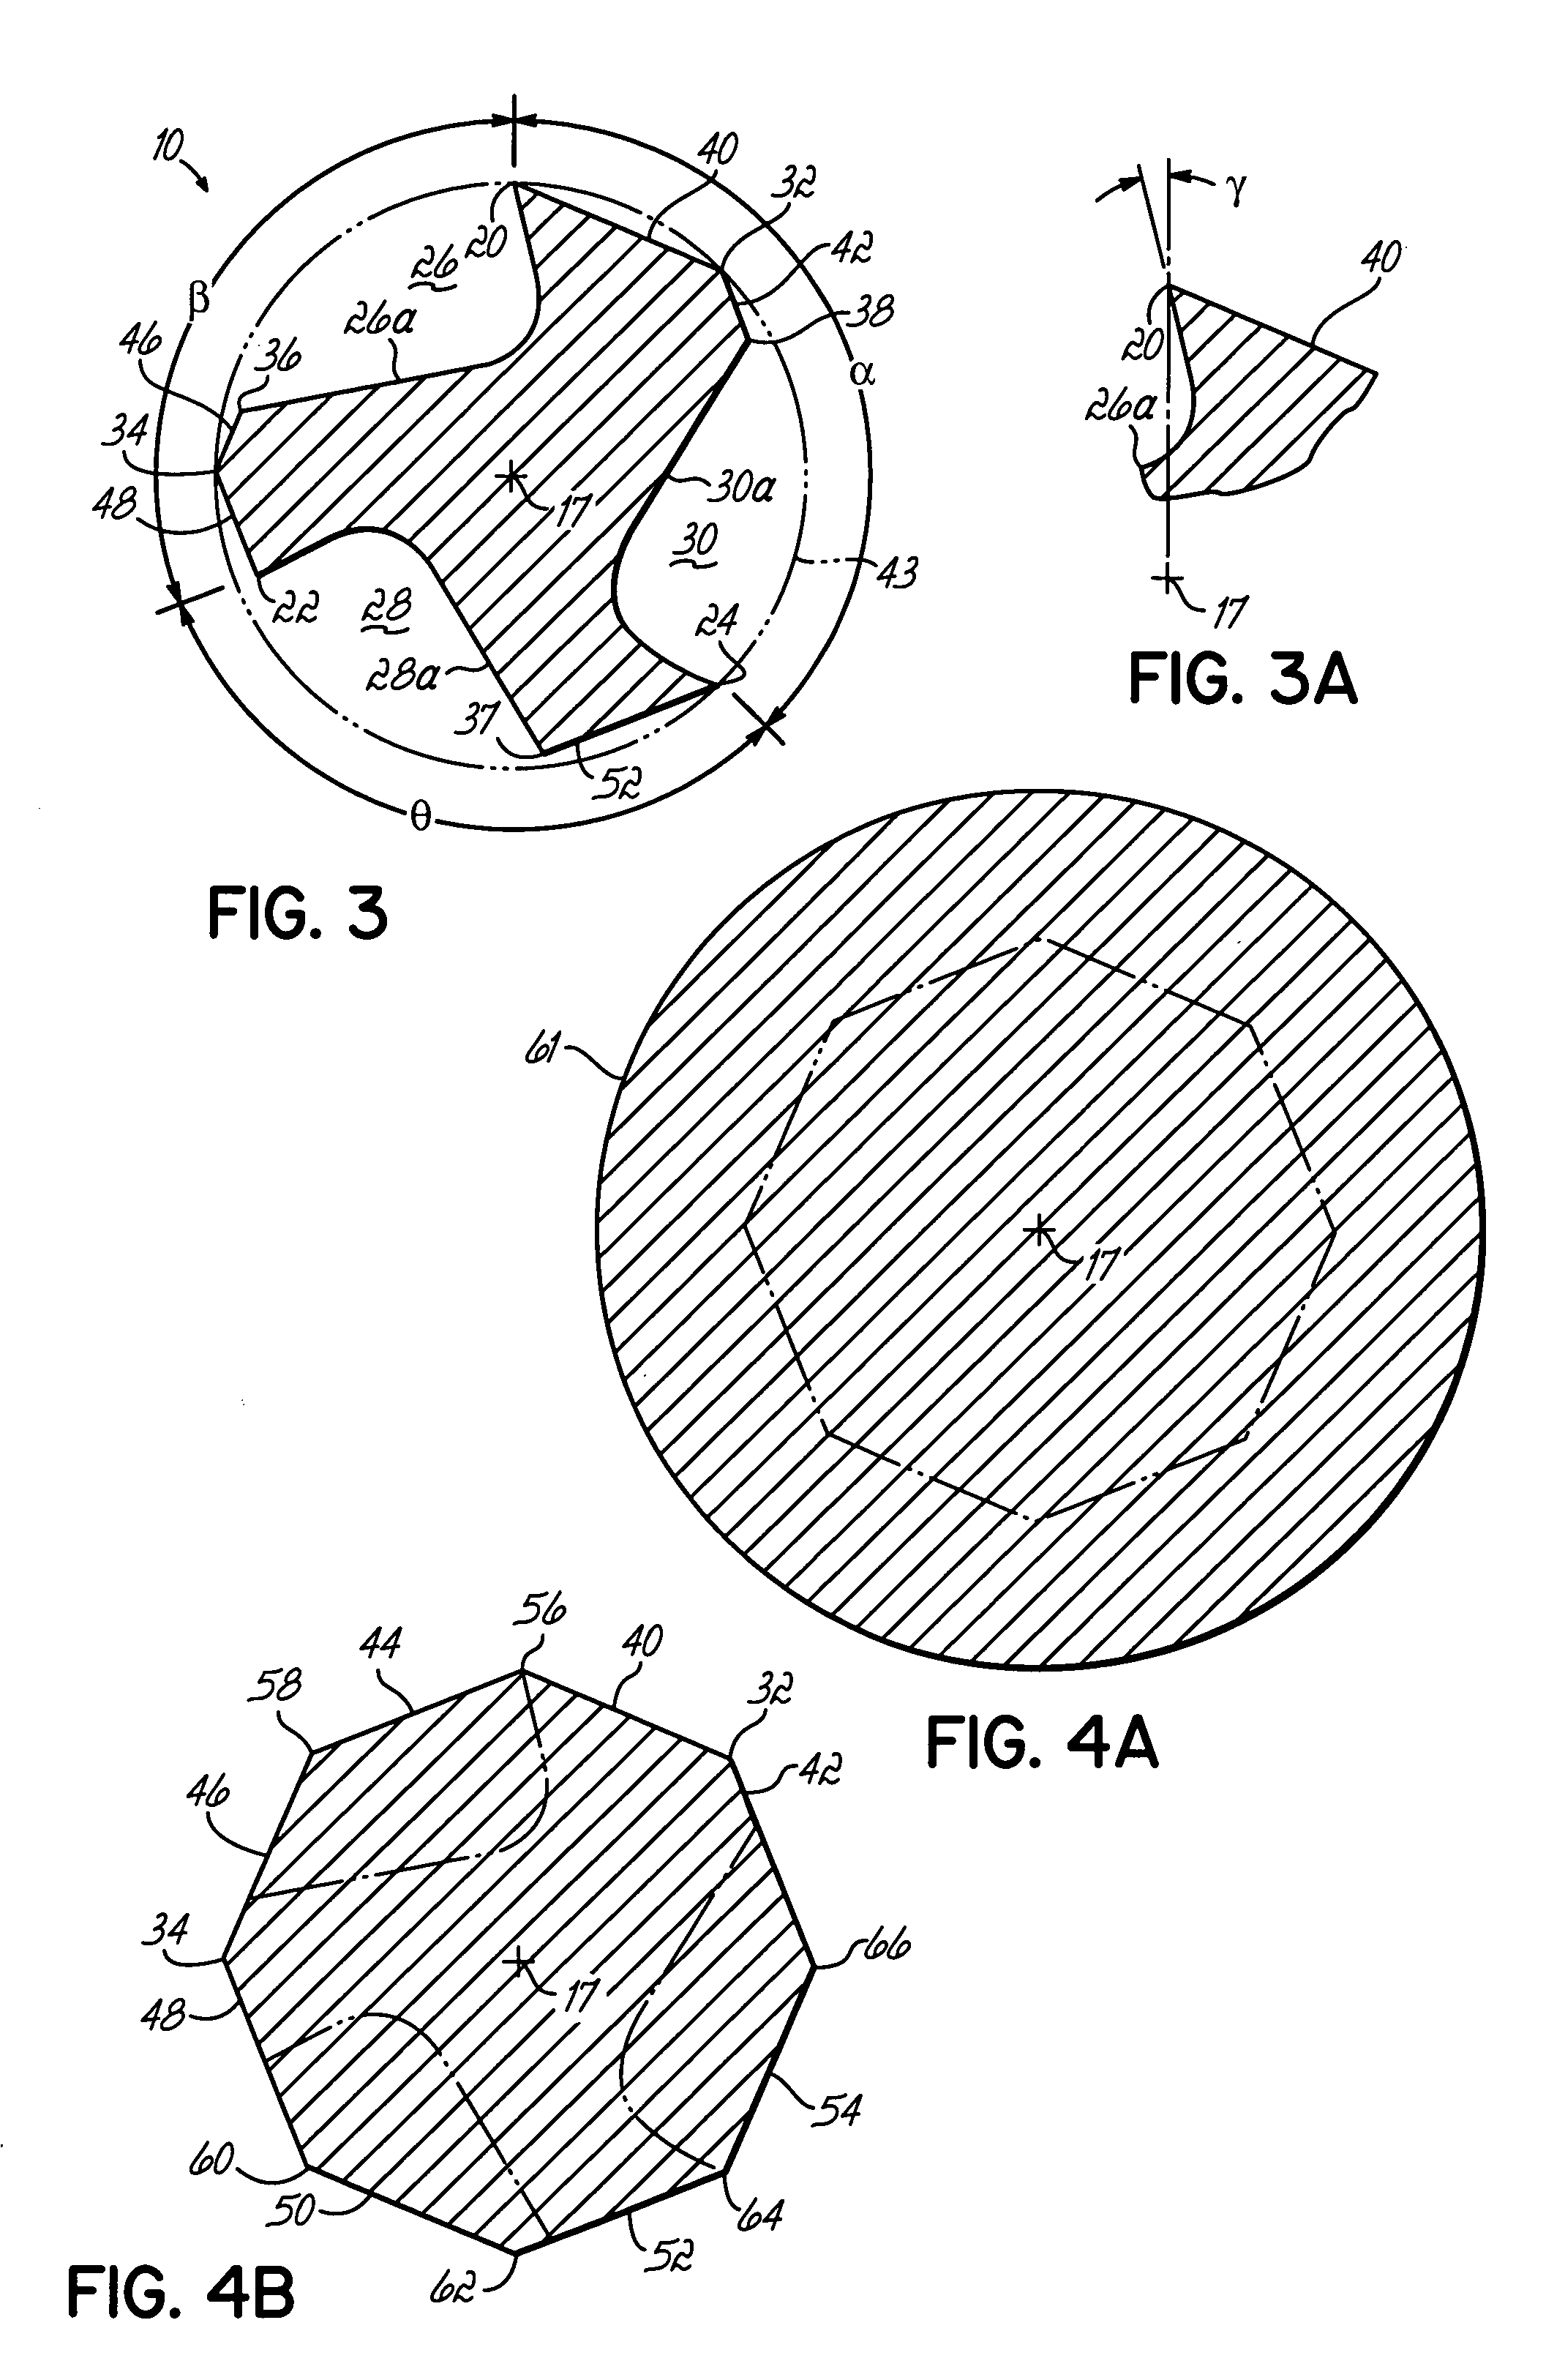 Non-landed endodontic instrument and methods of making such endodontic instruments